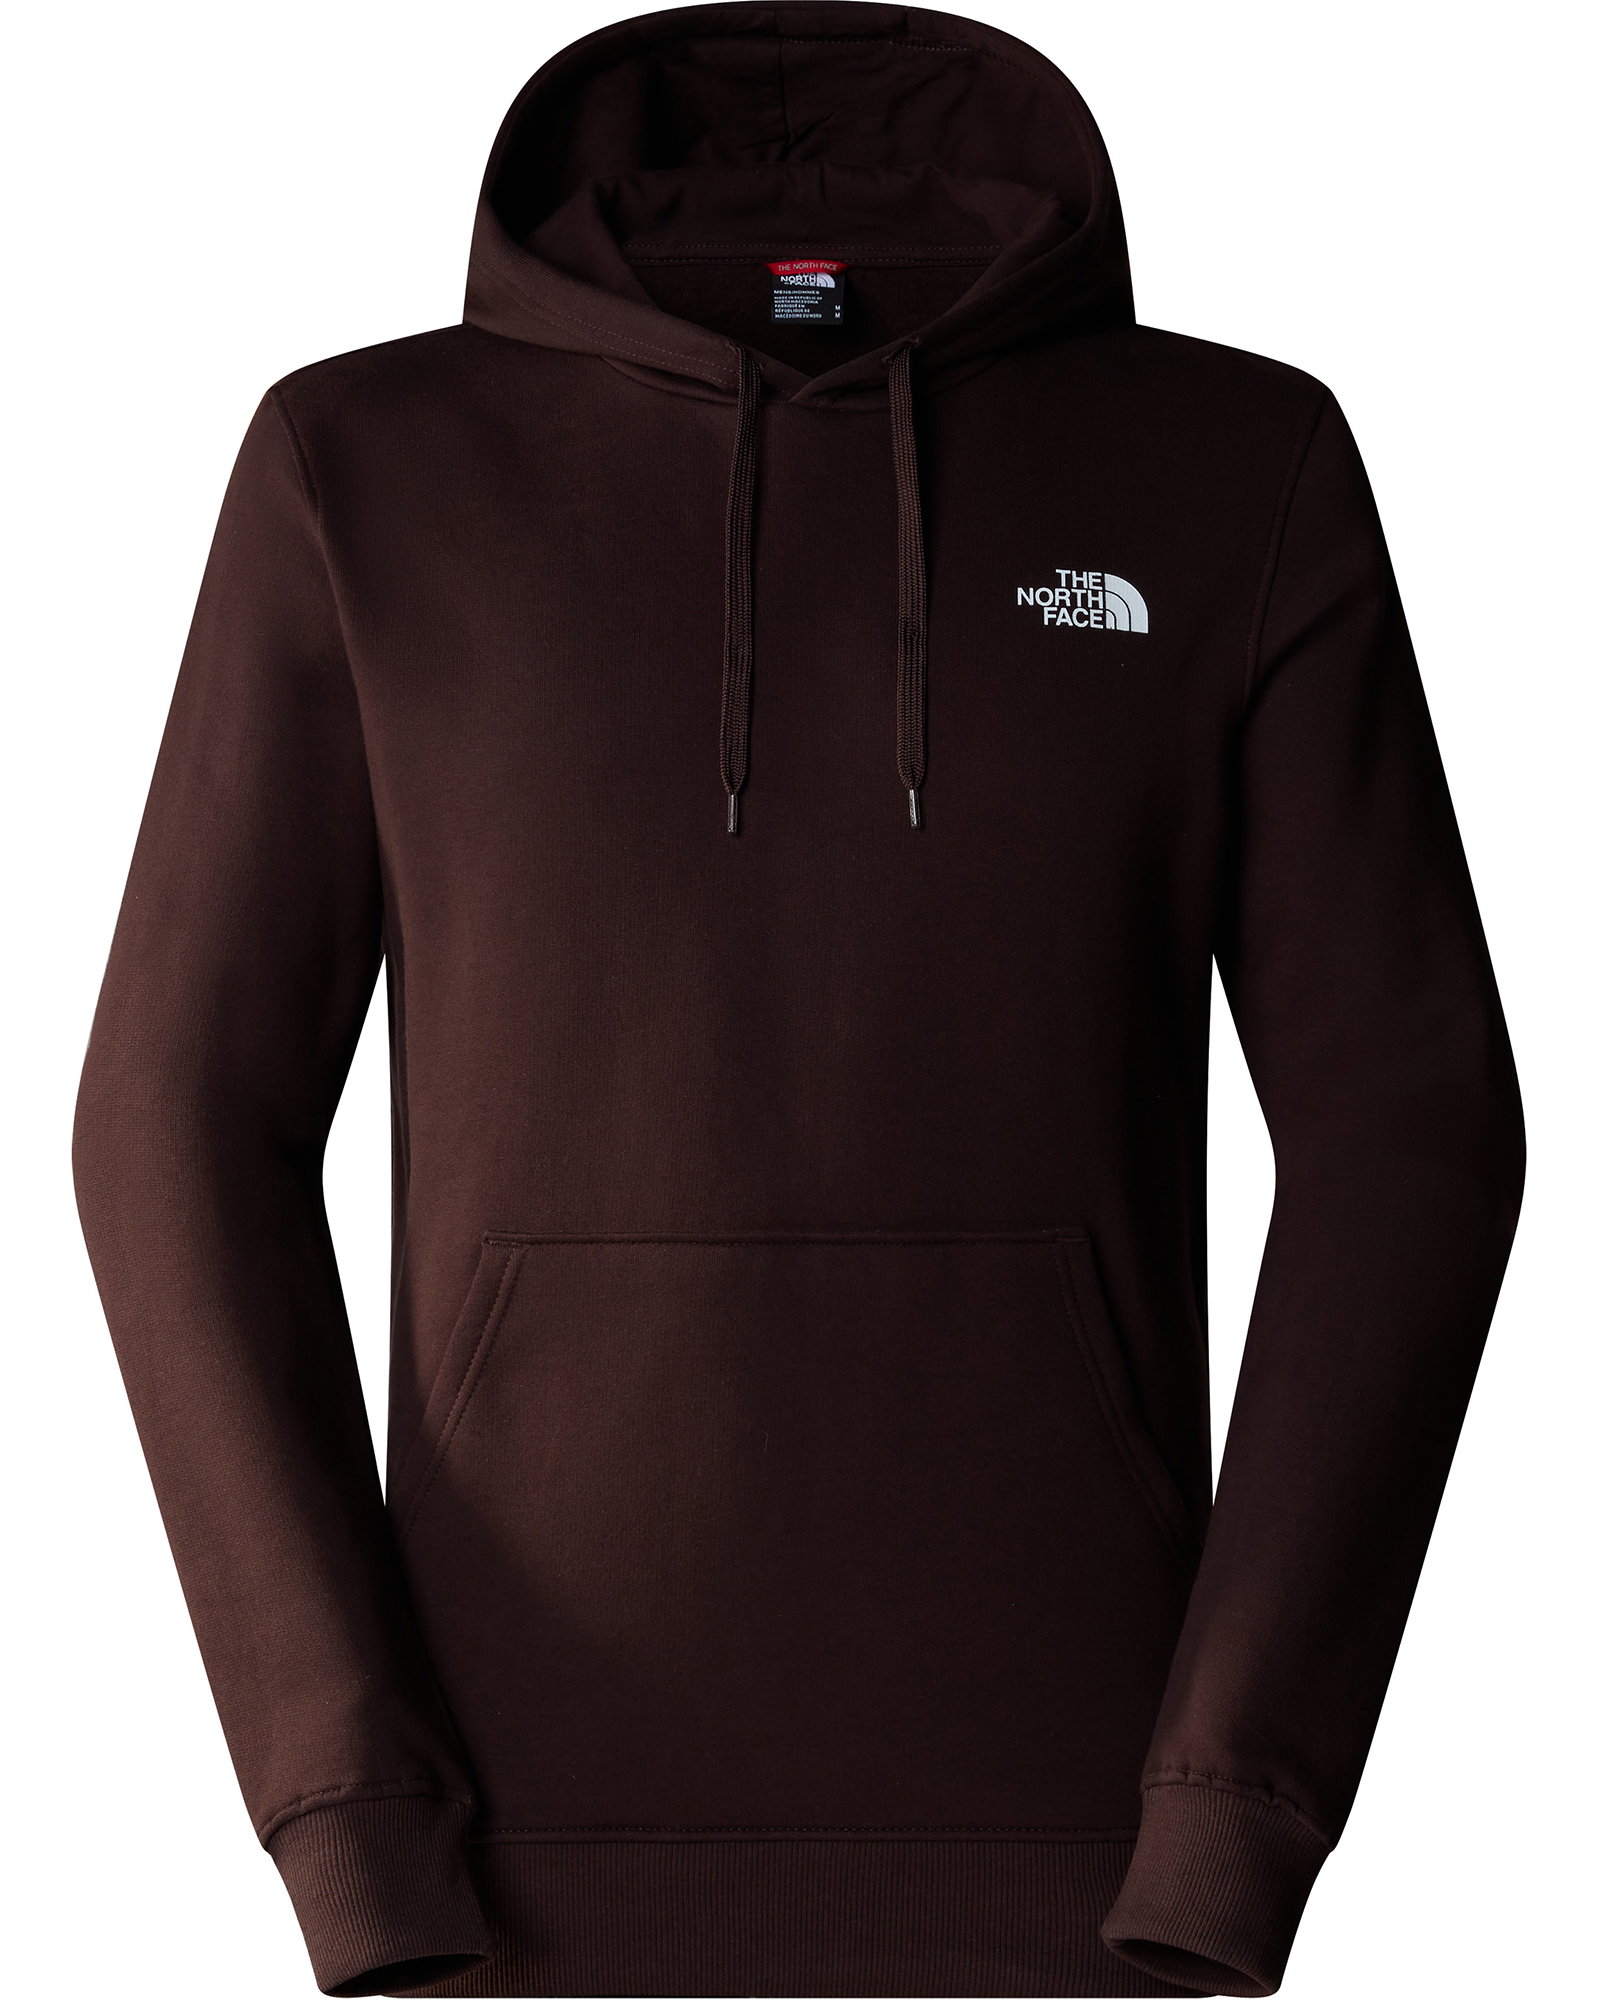 The North Face Simple Dome Men’s Hoodie - Coal Brown XS